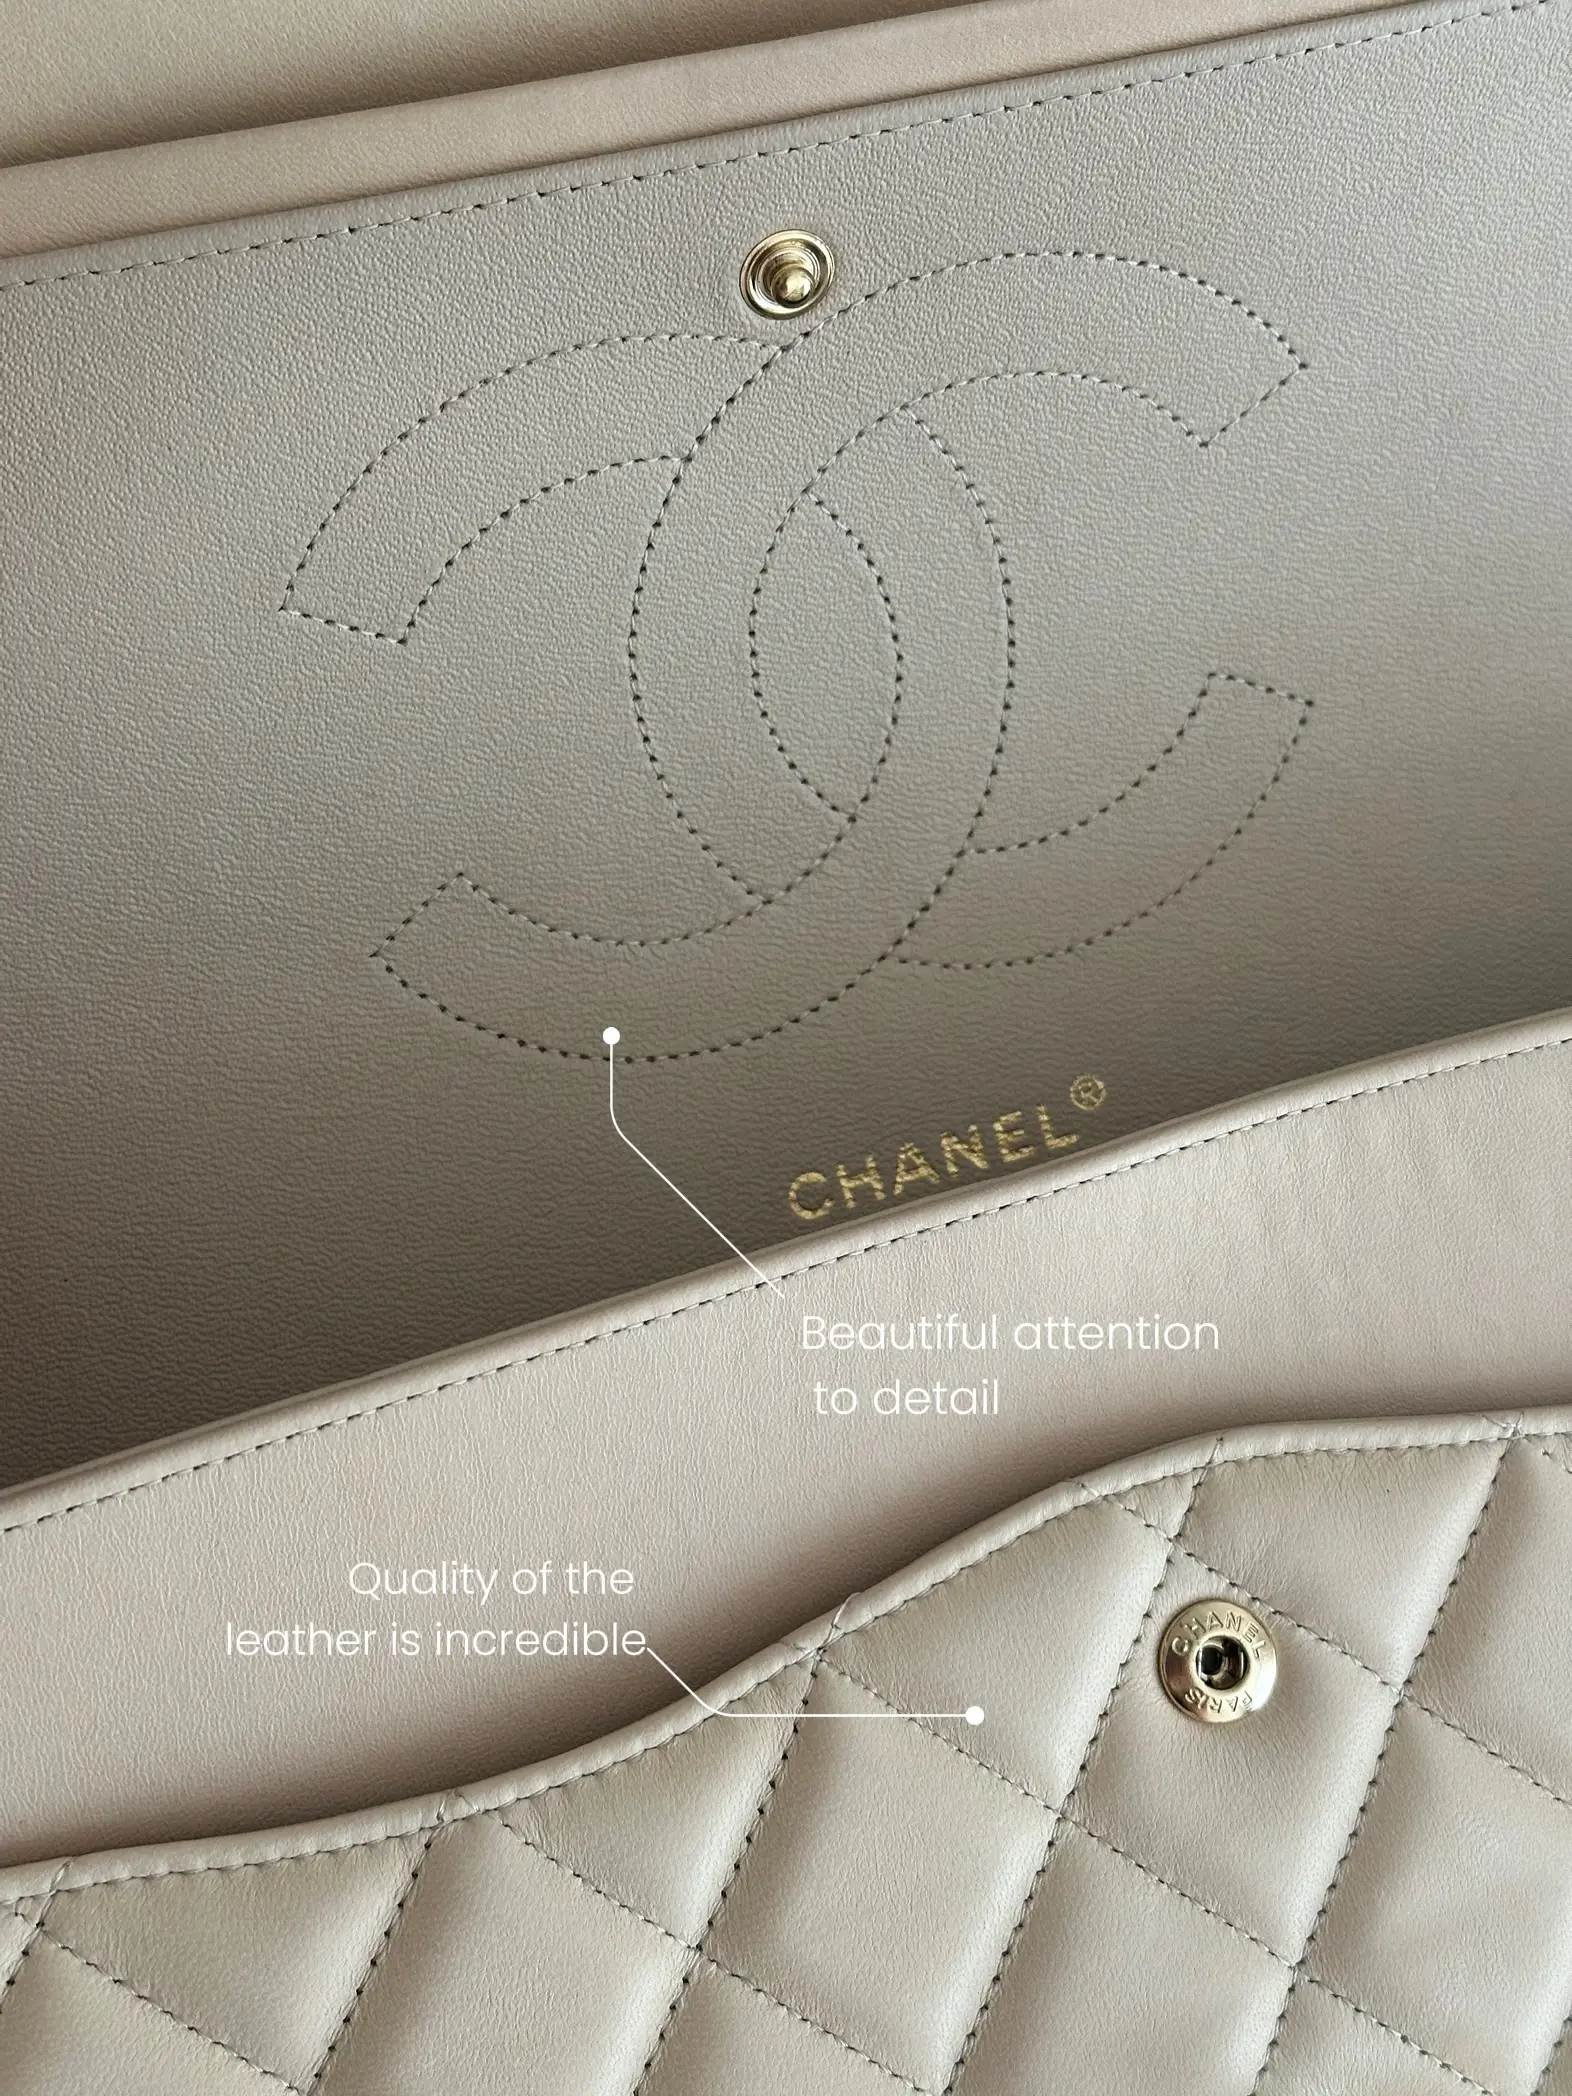 Chanel classic jumbo bag: is it worth it? 🥐, Gallery posted by Sarah  Mantelin